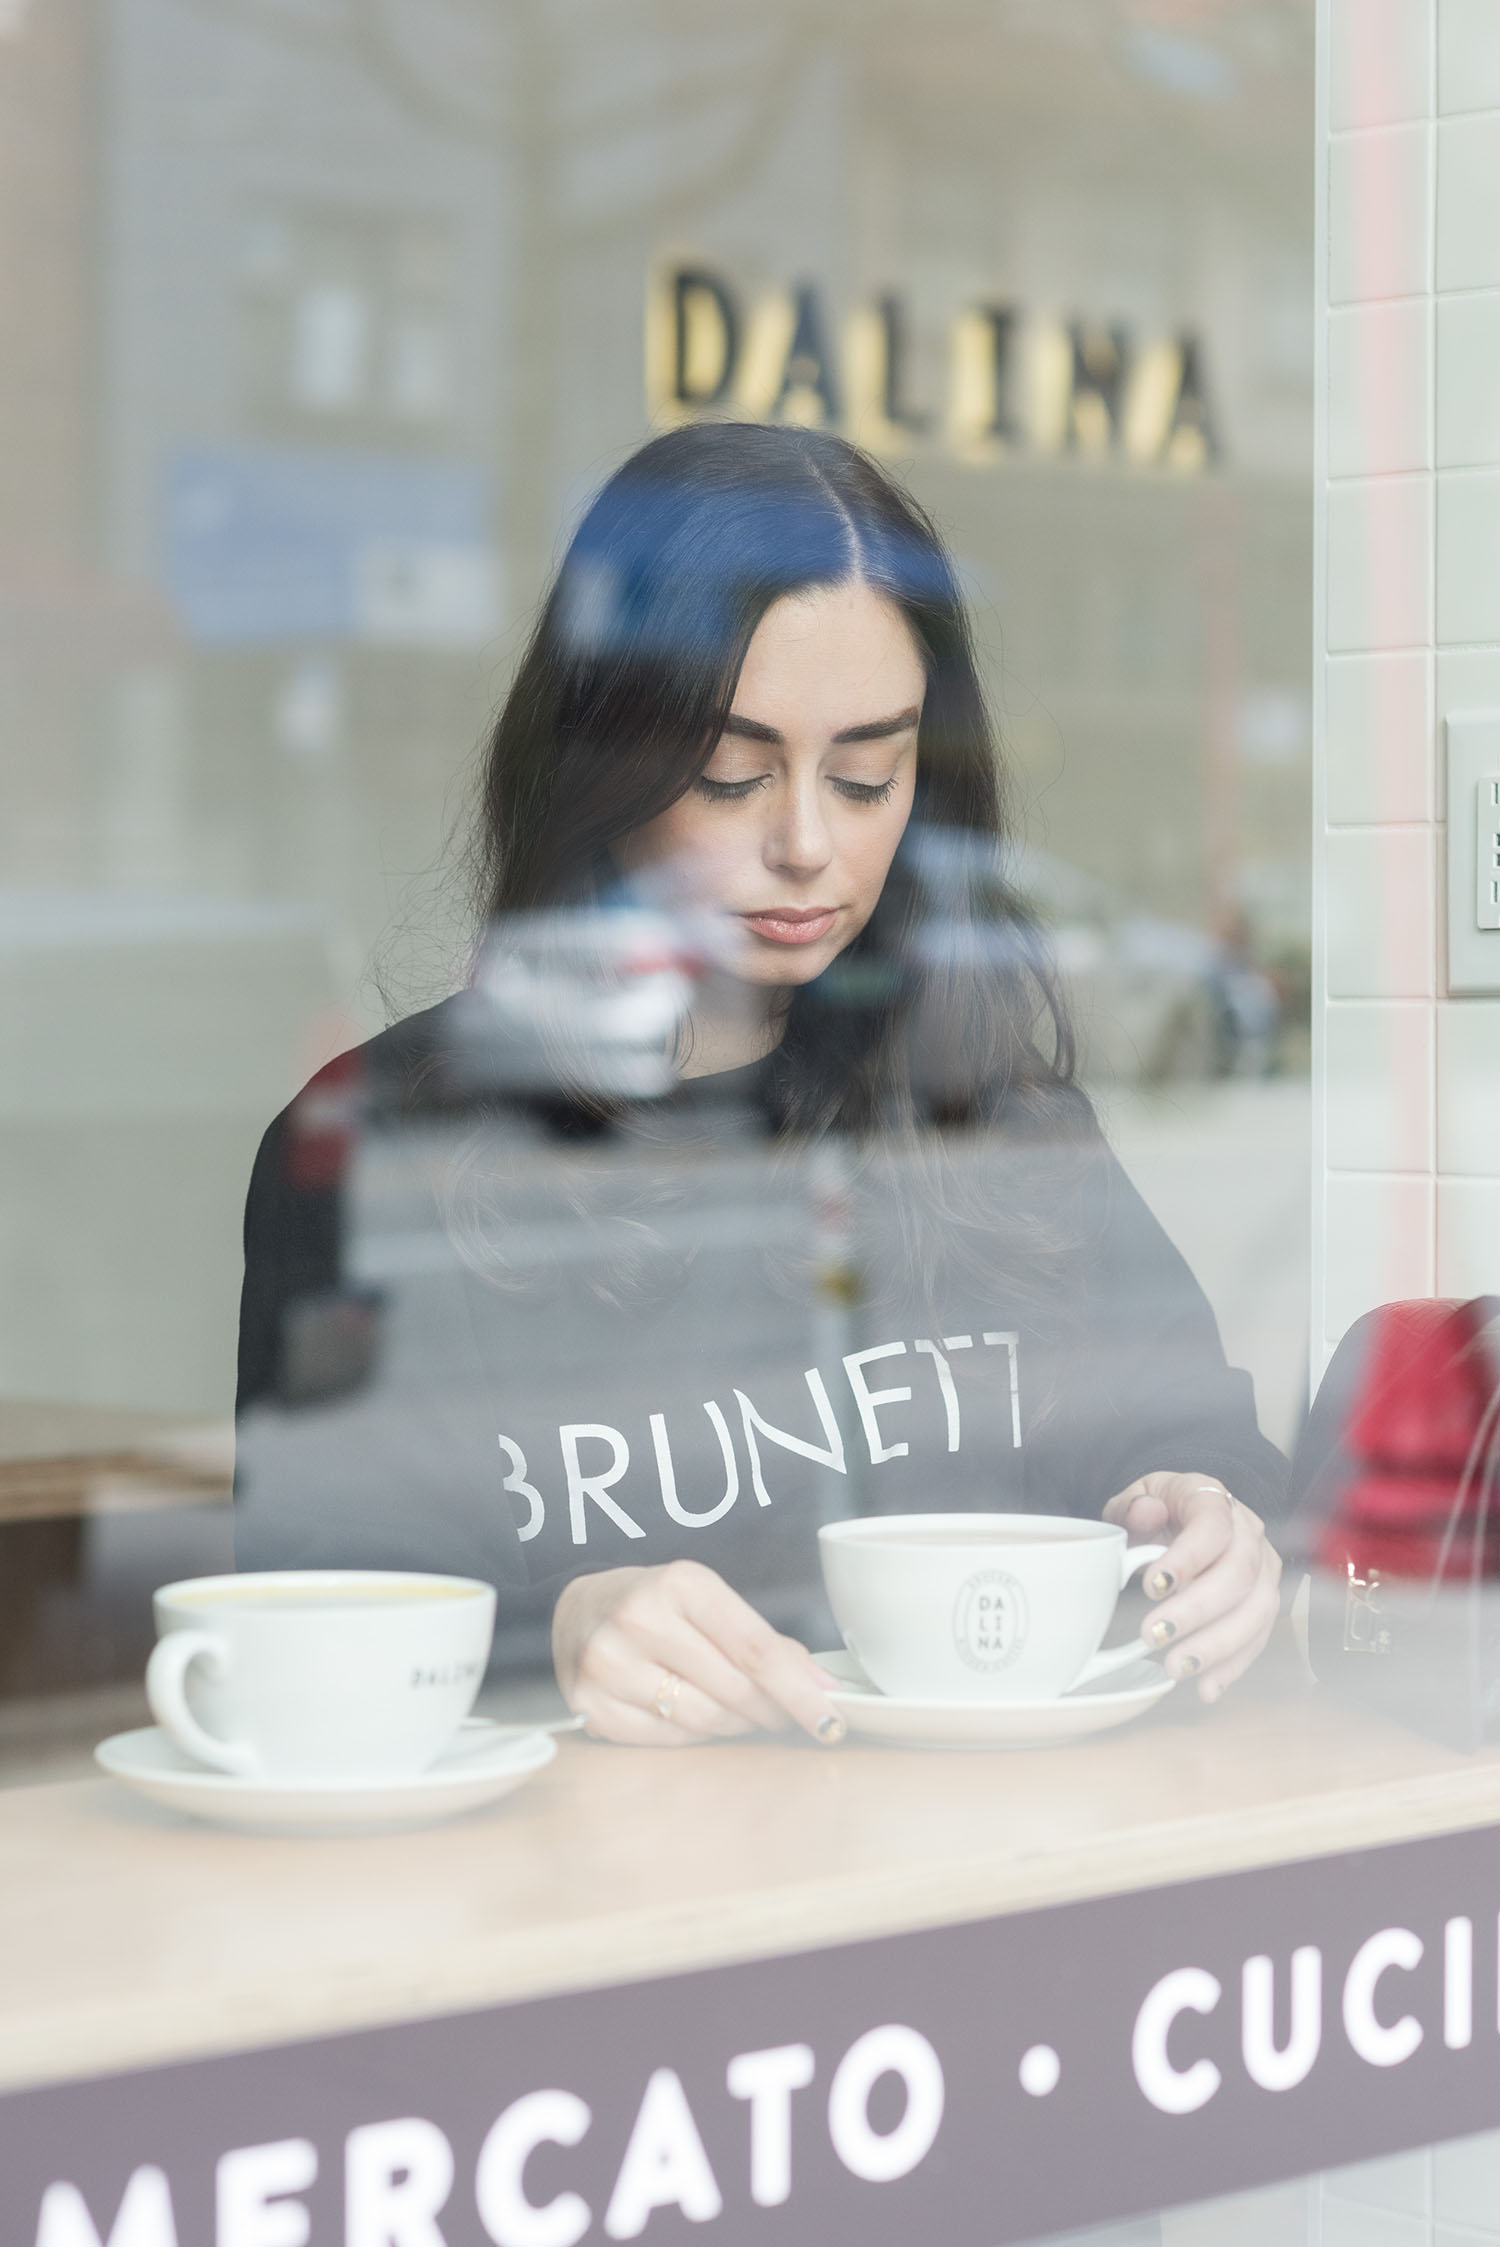 Portrait of fashion blogger Cee Fardoe of Coco & Vera, seen through the front window of Dalina in Vancouver, wearing a Brunette the Label sweatshirt